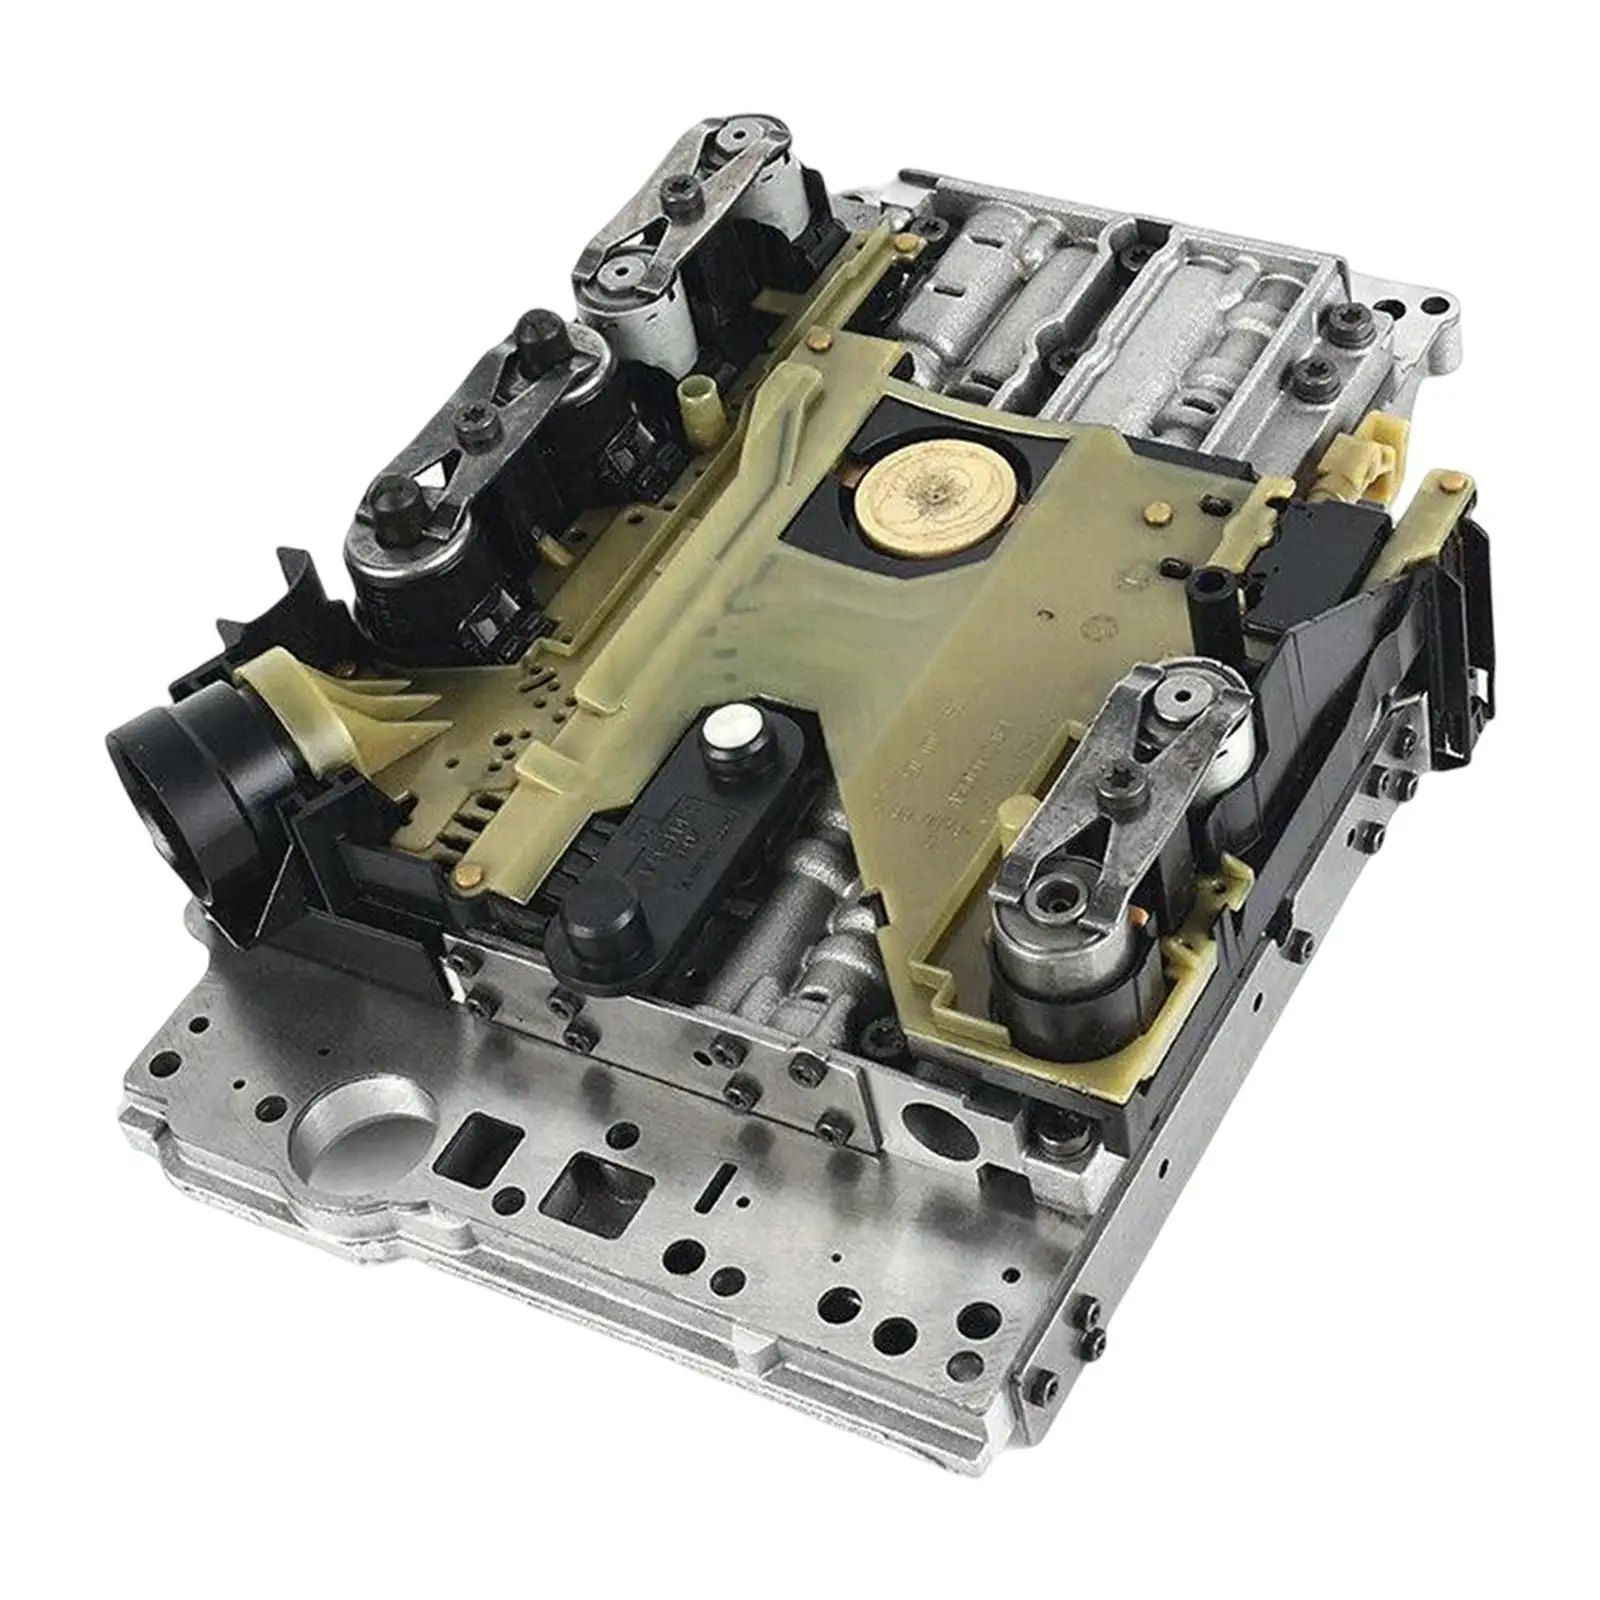  Transmission Valve Body, 2700106 For Sprinter 2500 3500 Accessories  Durable - Automatic Transmission & Parts - AliExpress